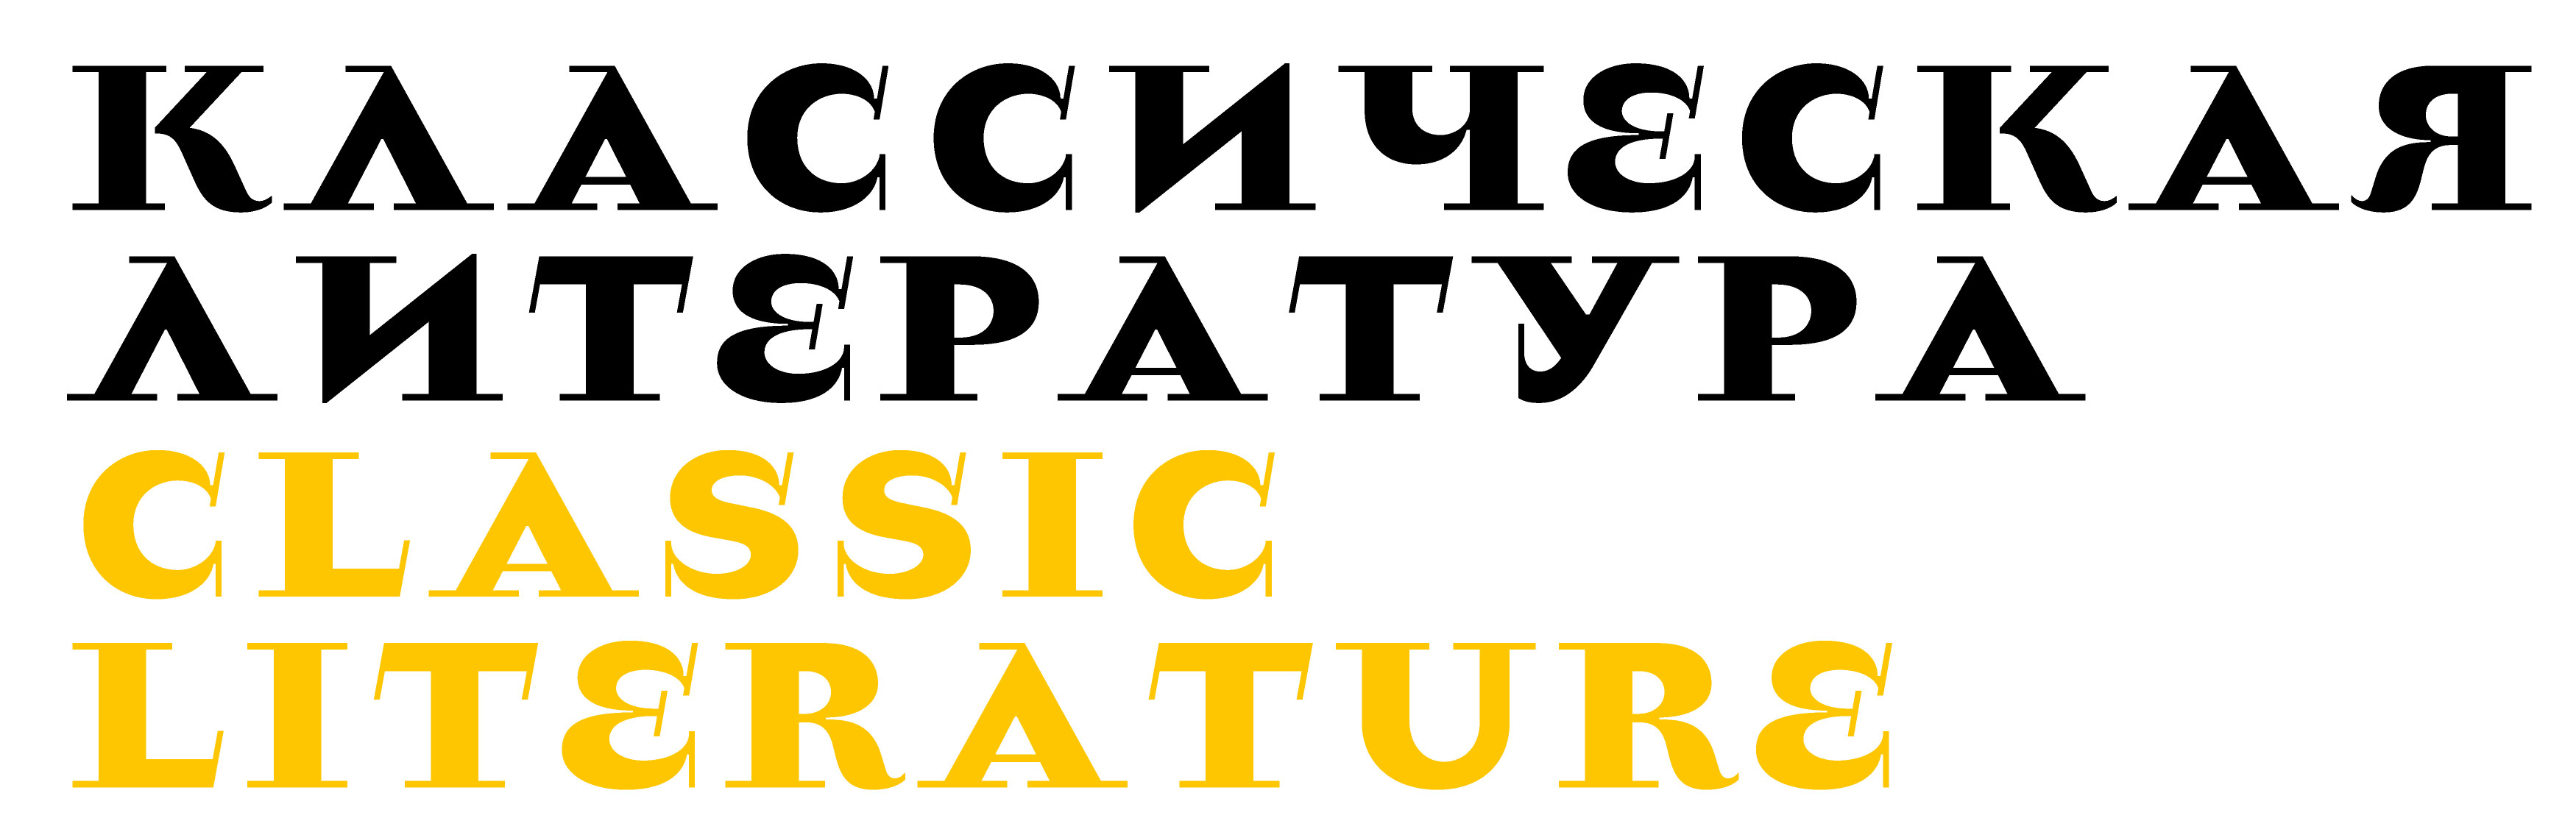 mts library font 01